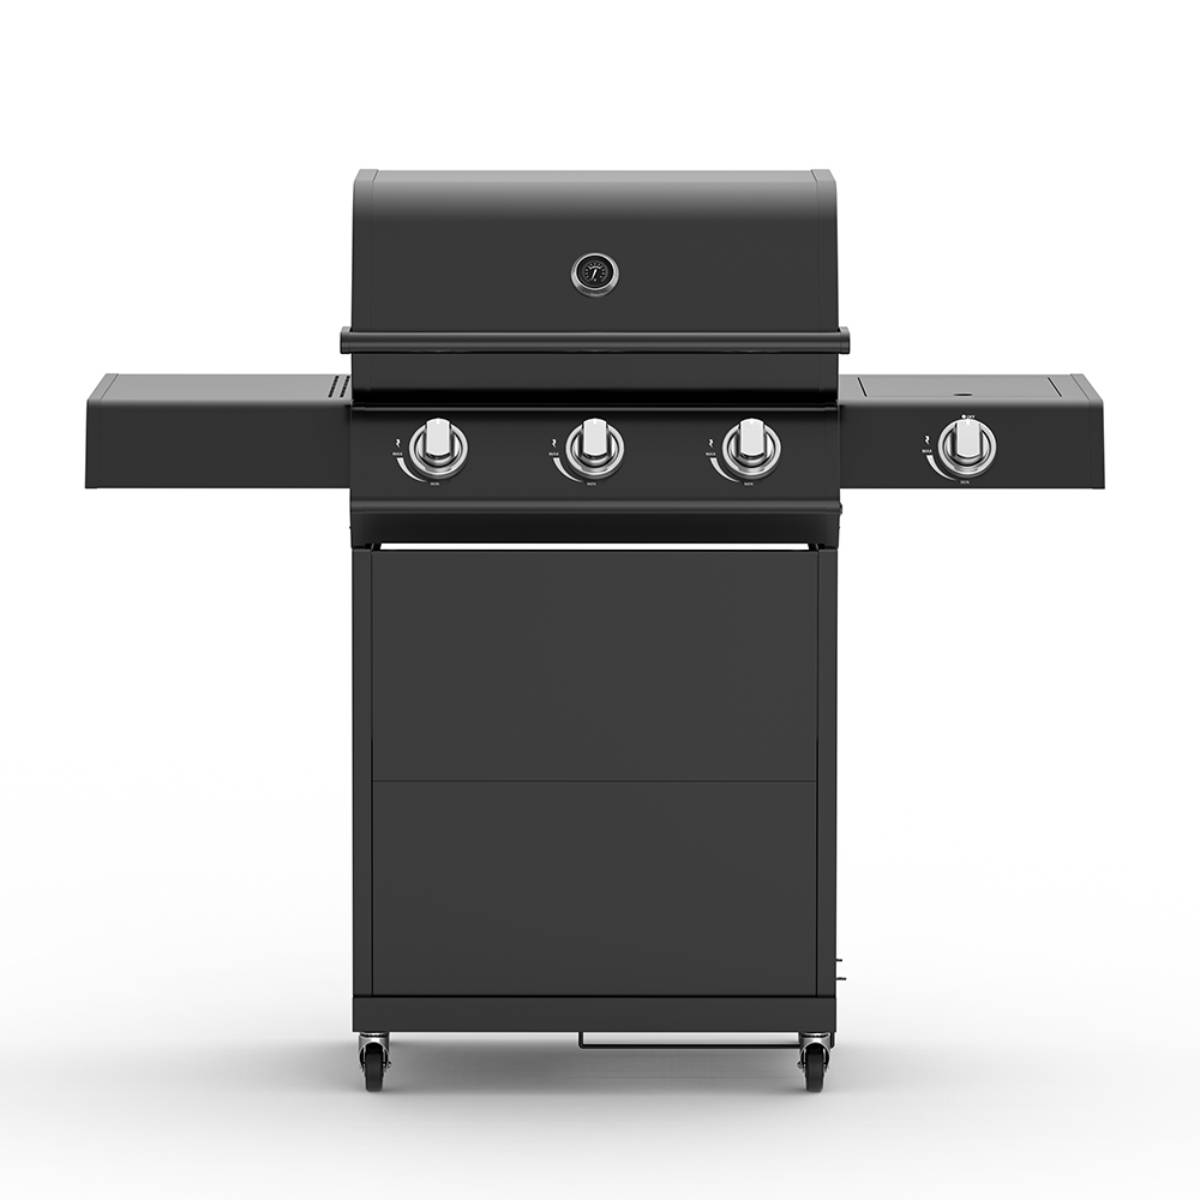 EQBA13B-1 3BURNER GRILL WITH SIDE BURNER PATIO Barbecue Grill